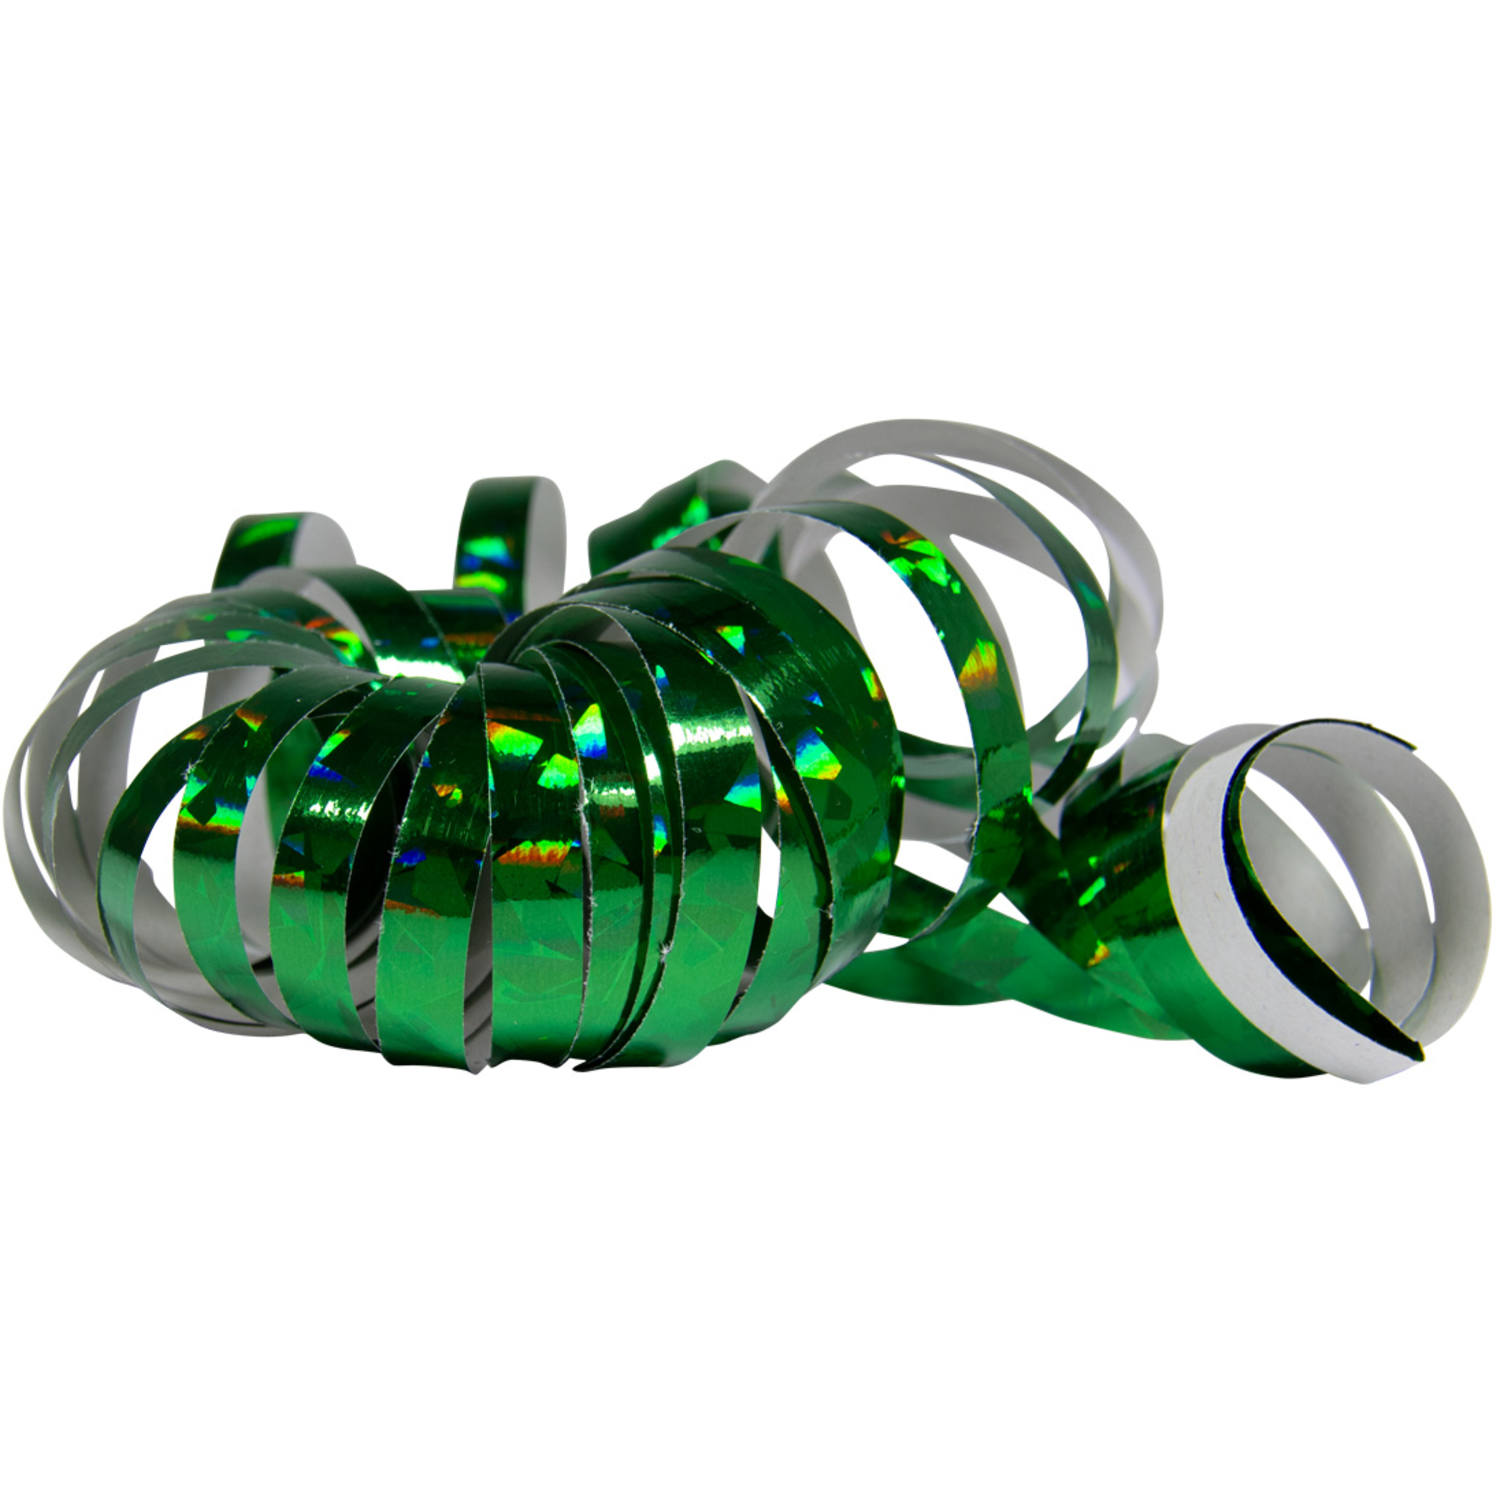 Serpentines Holographic Green 4m - 2 pieces 2